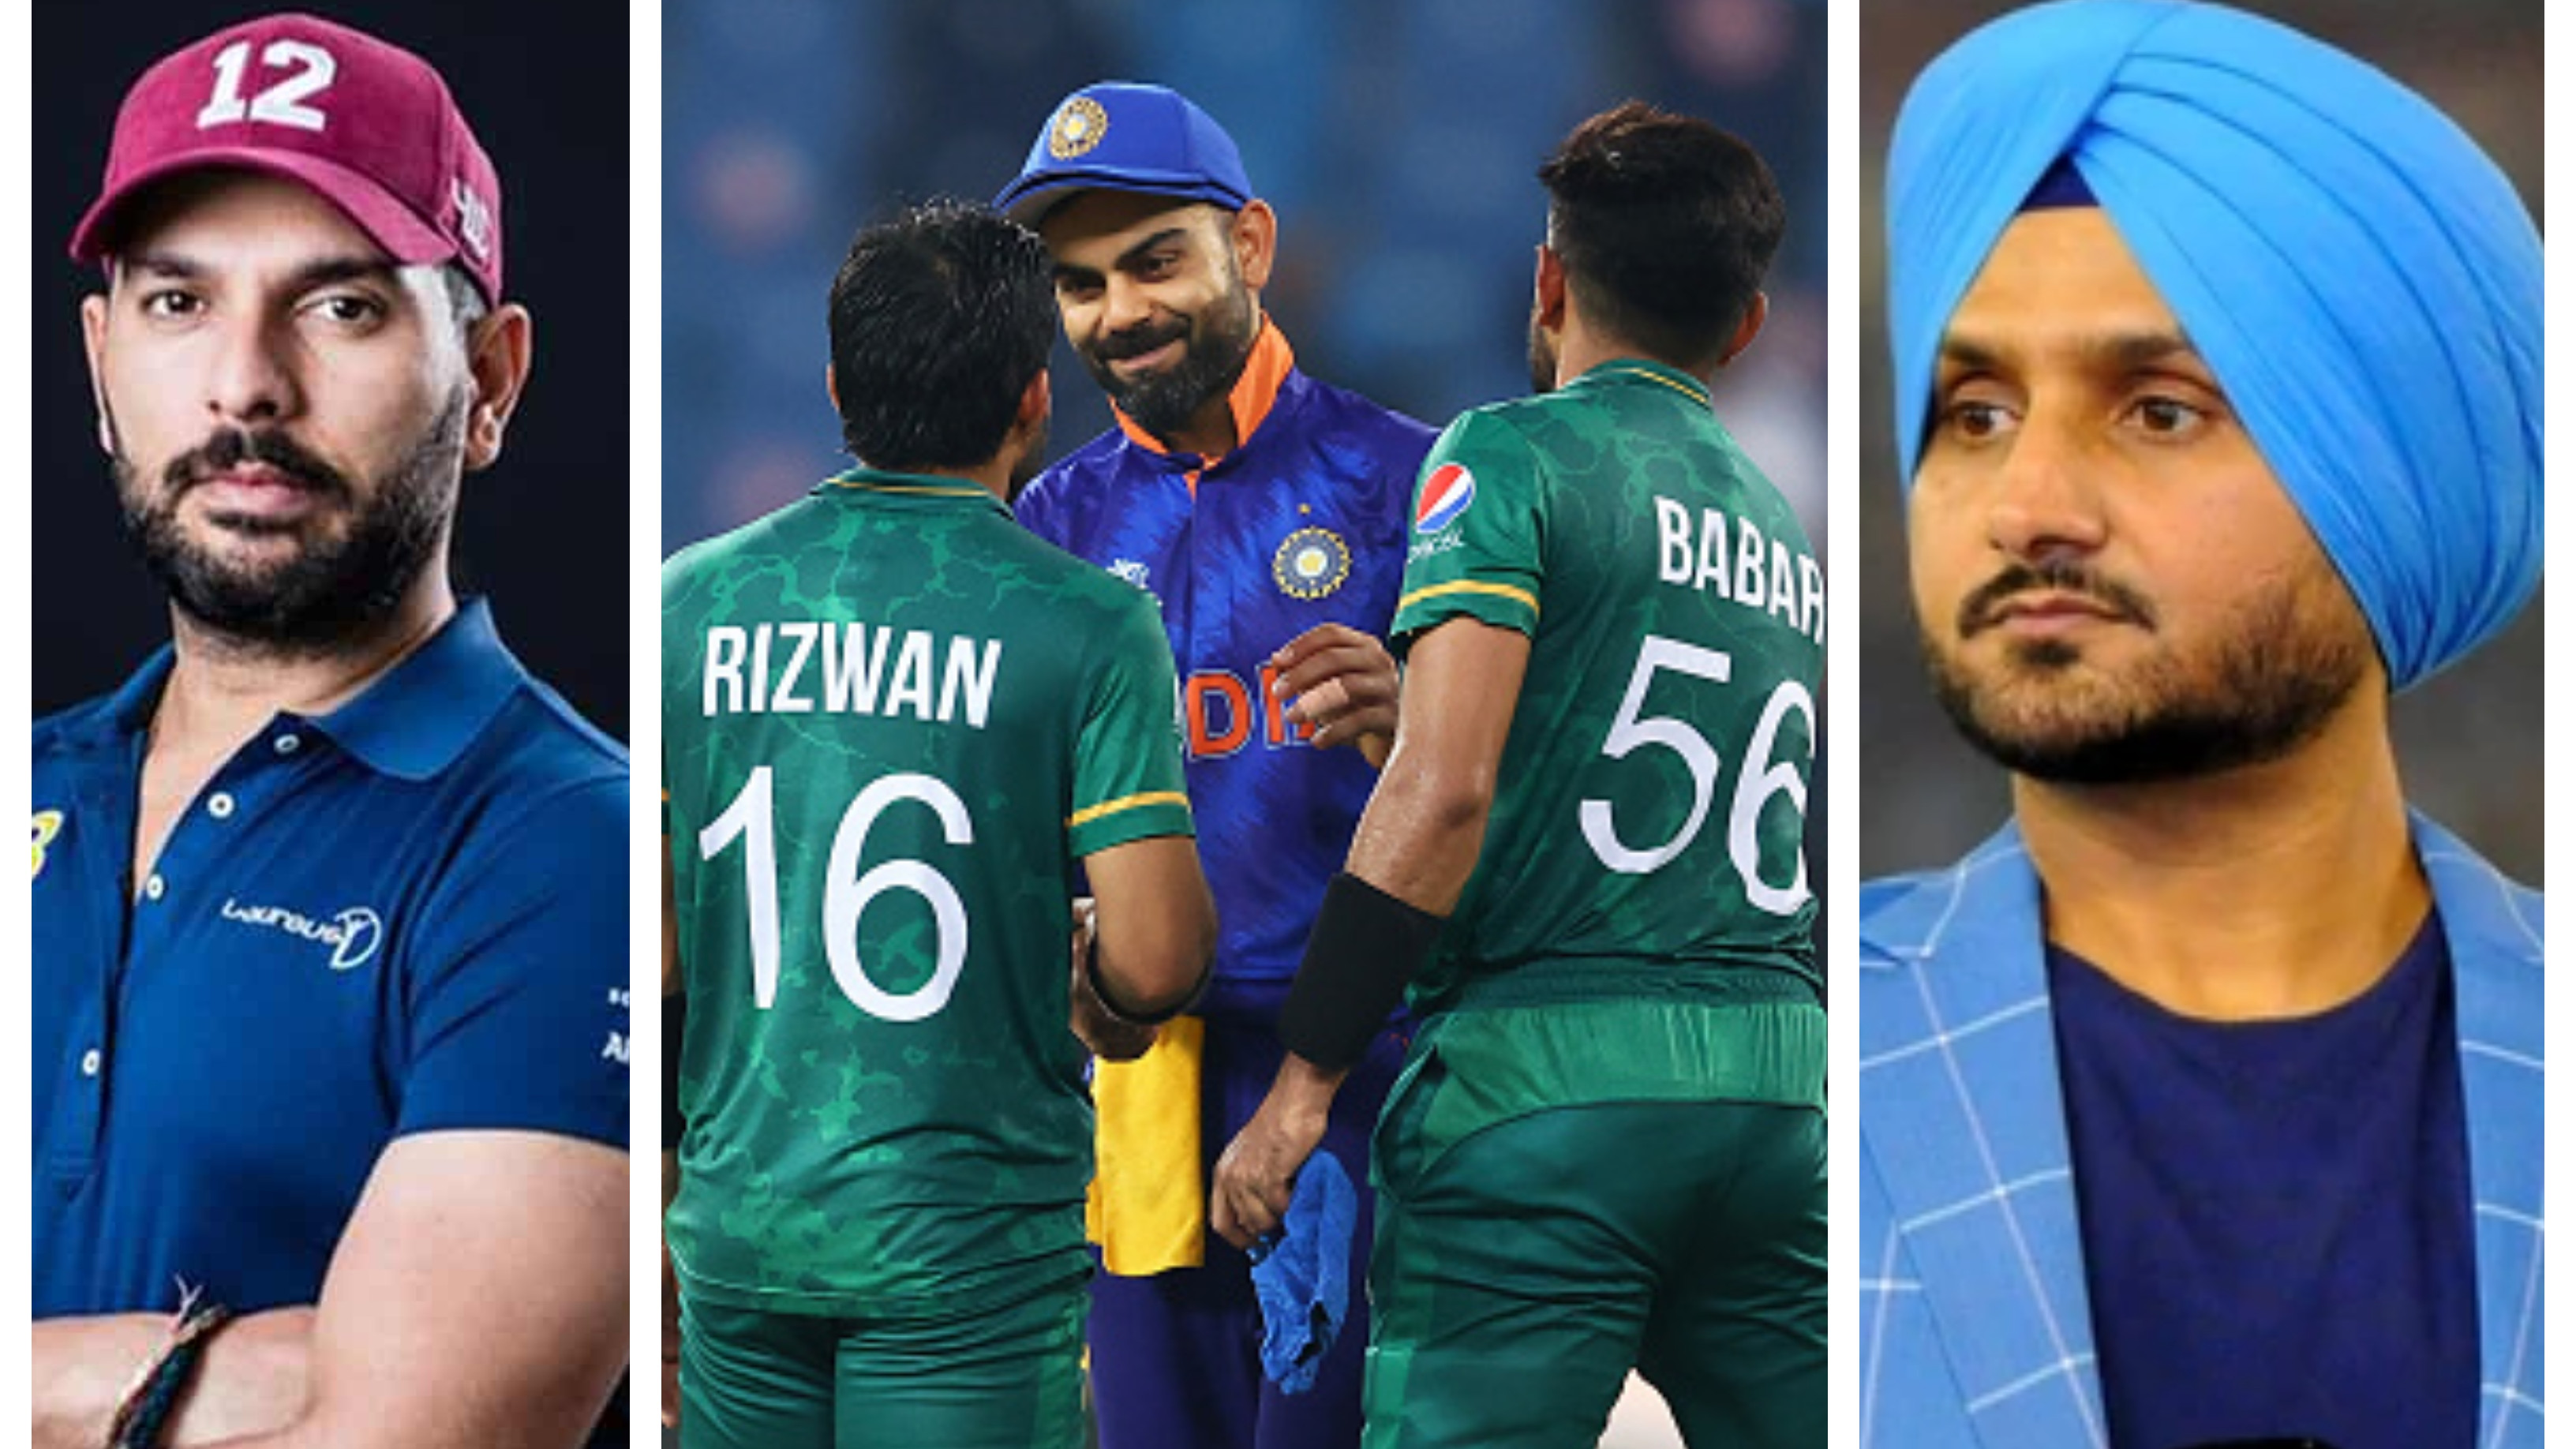 T20 World Cup 2021: Indian cricket fraternity congratulate Pakistan on ending World Cup jinx versus India